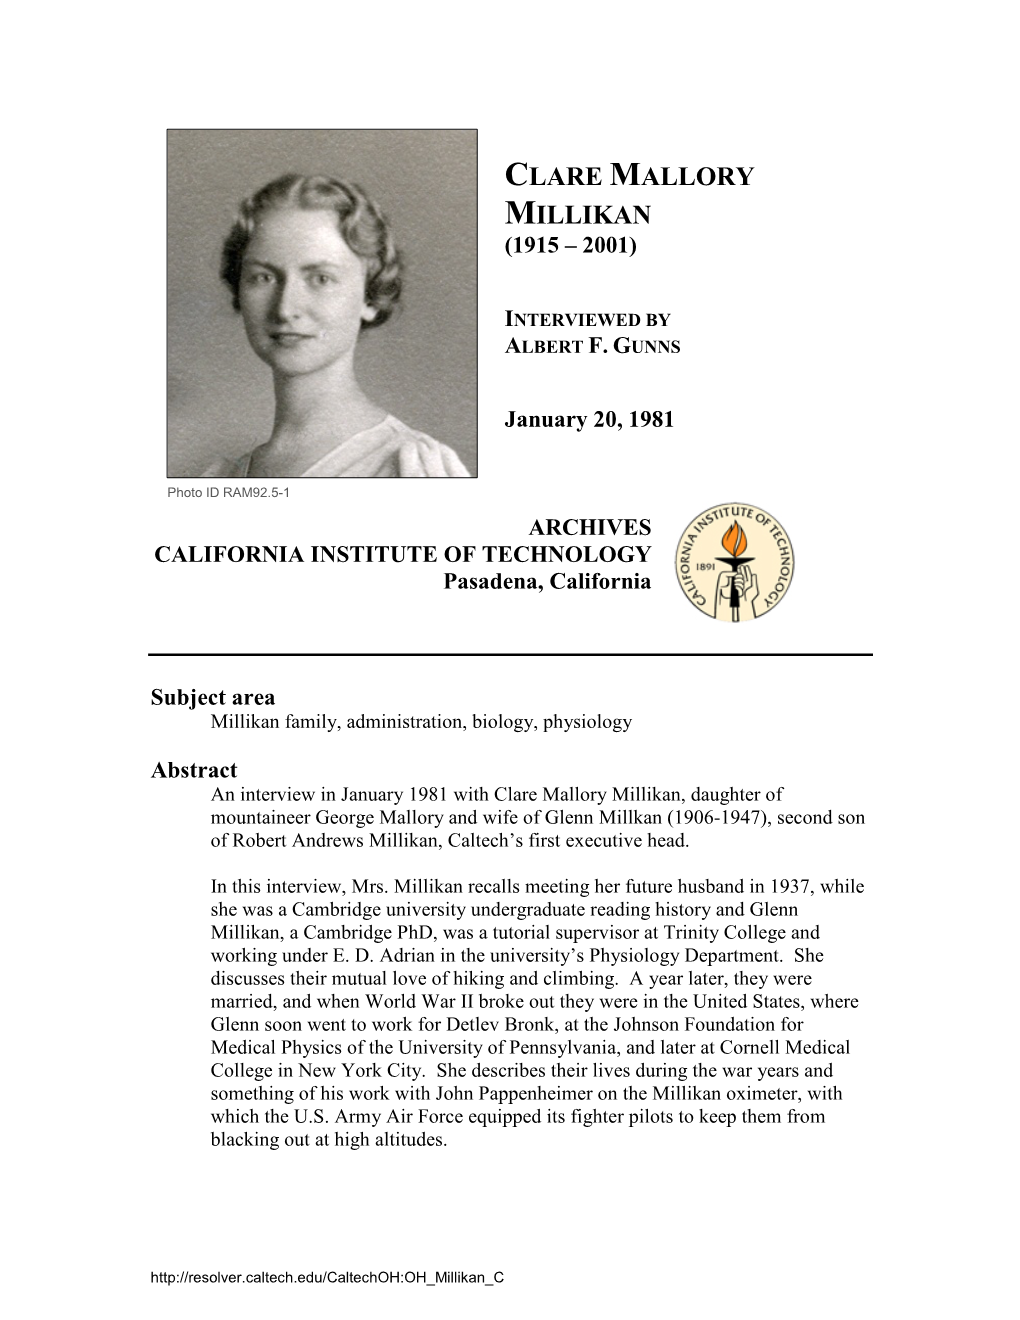 Interview with Clare Mallory Millikan